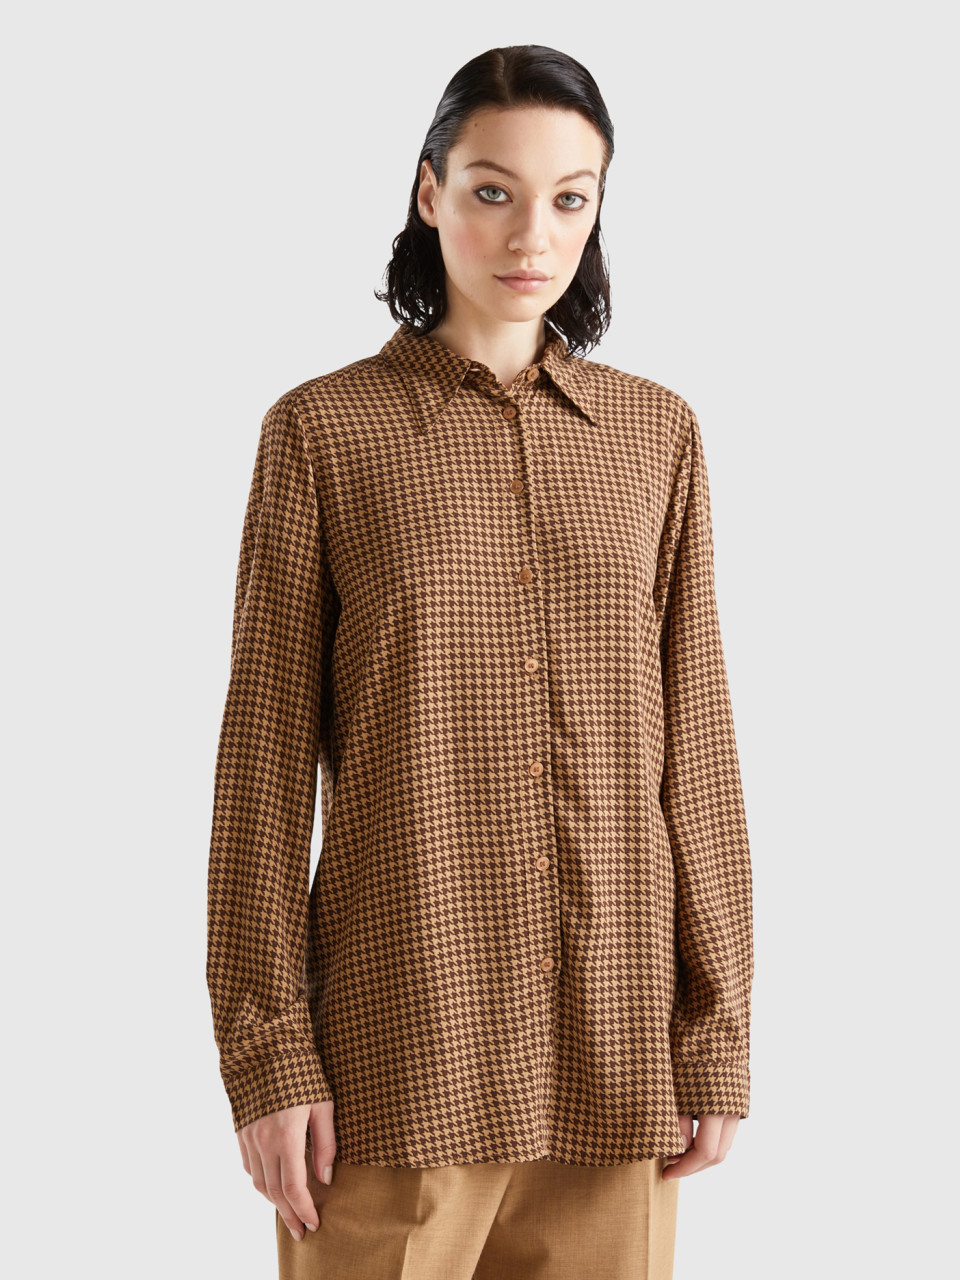 Benetton, Patterned Shirt In Sustainable Viscose, Brown, Women